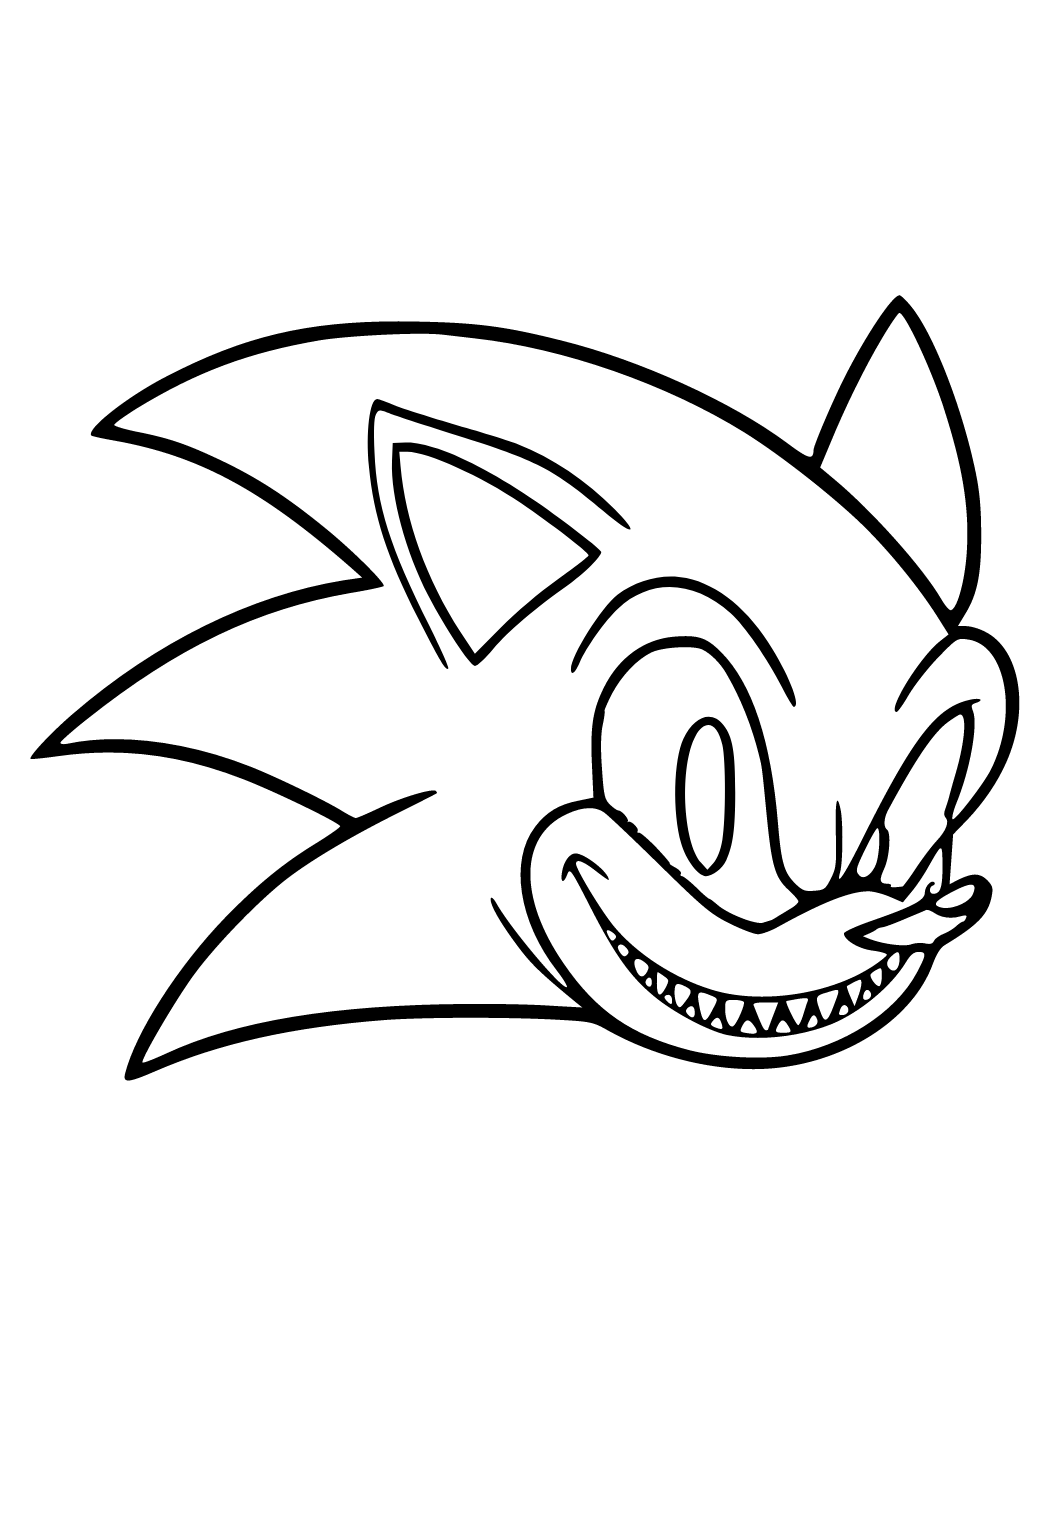 Free printable sonic exe head coloring page for adults and kids